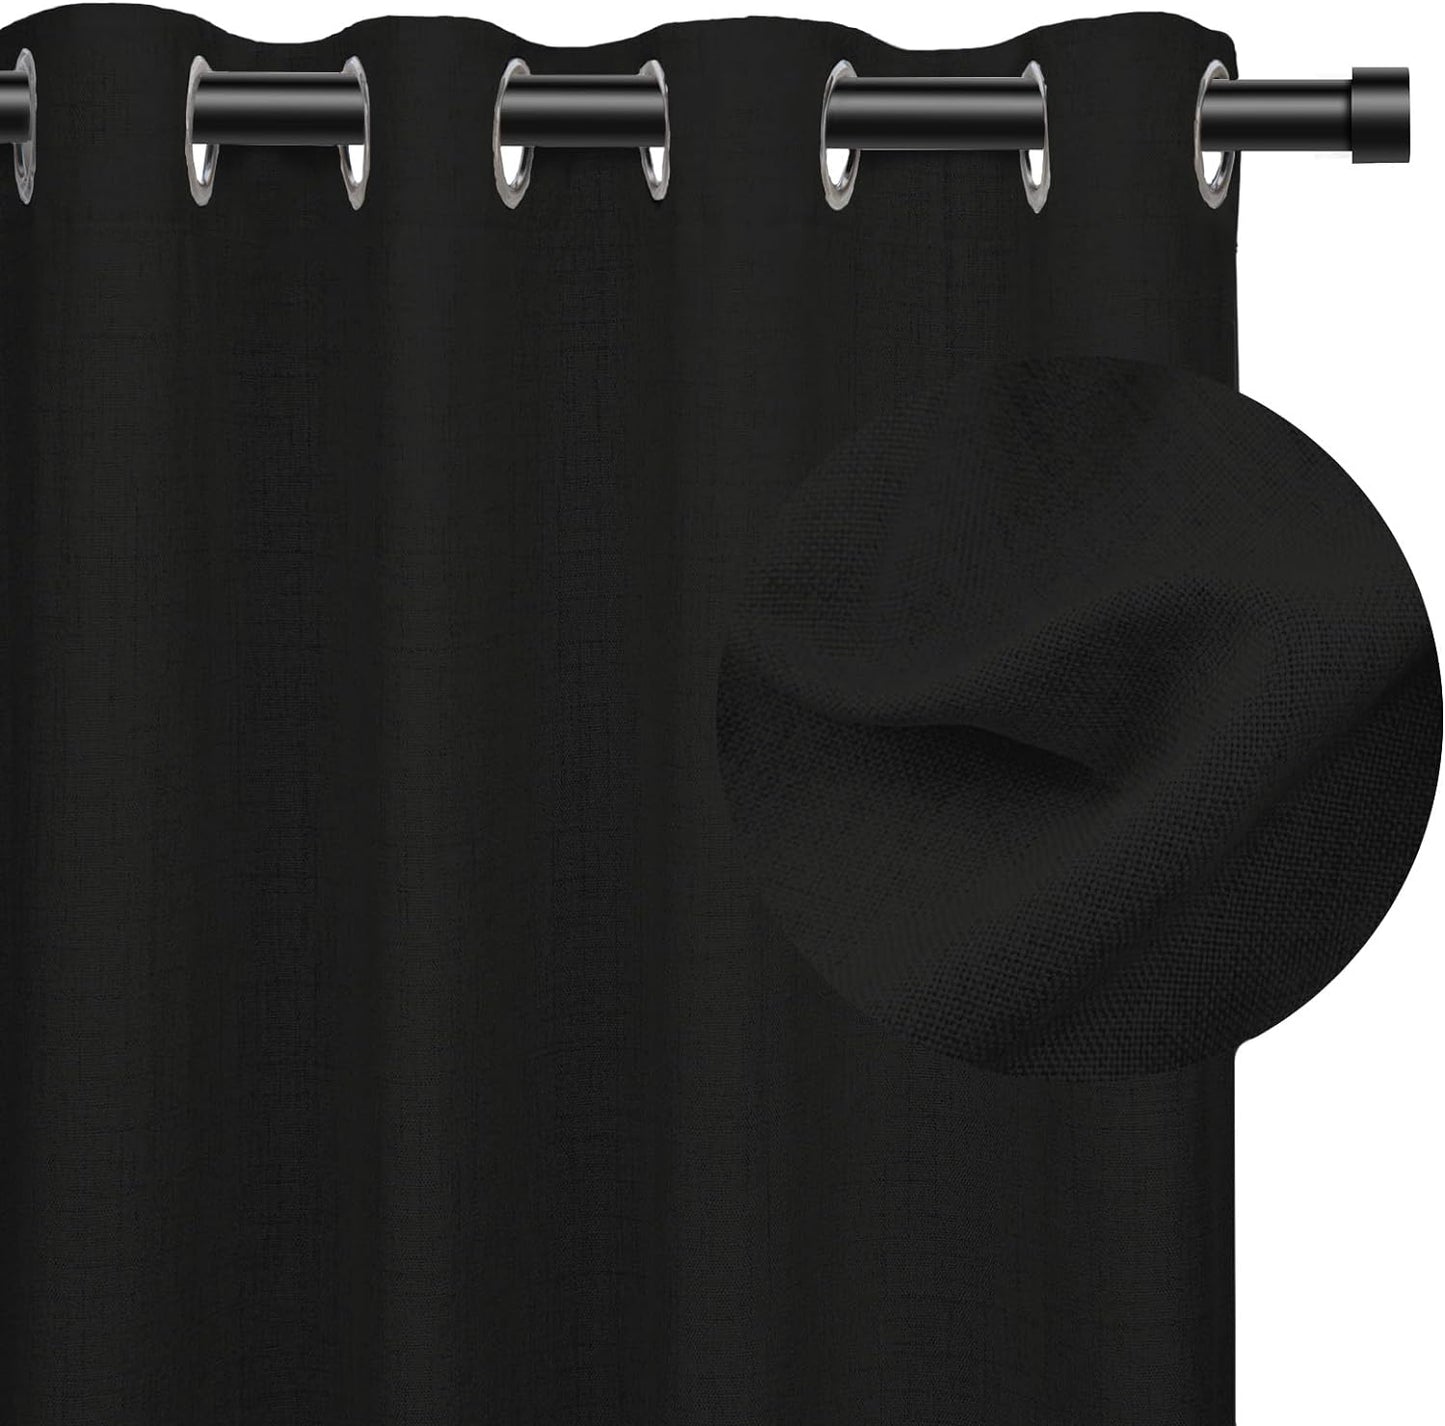 RHF Blackout Curtains 84 Inch Length 2 Panels Set, Primitive Linen Look, 100% Blackout Curtains Linen Black Out Curtains for Bedroom Windows, Burlap Grommet Curtains-(50X84, Oatmeal)  Rose Home Fashion Black W50 X L63 